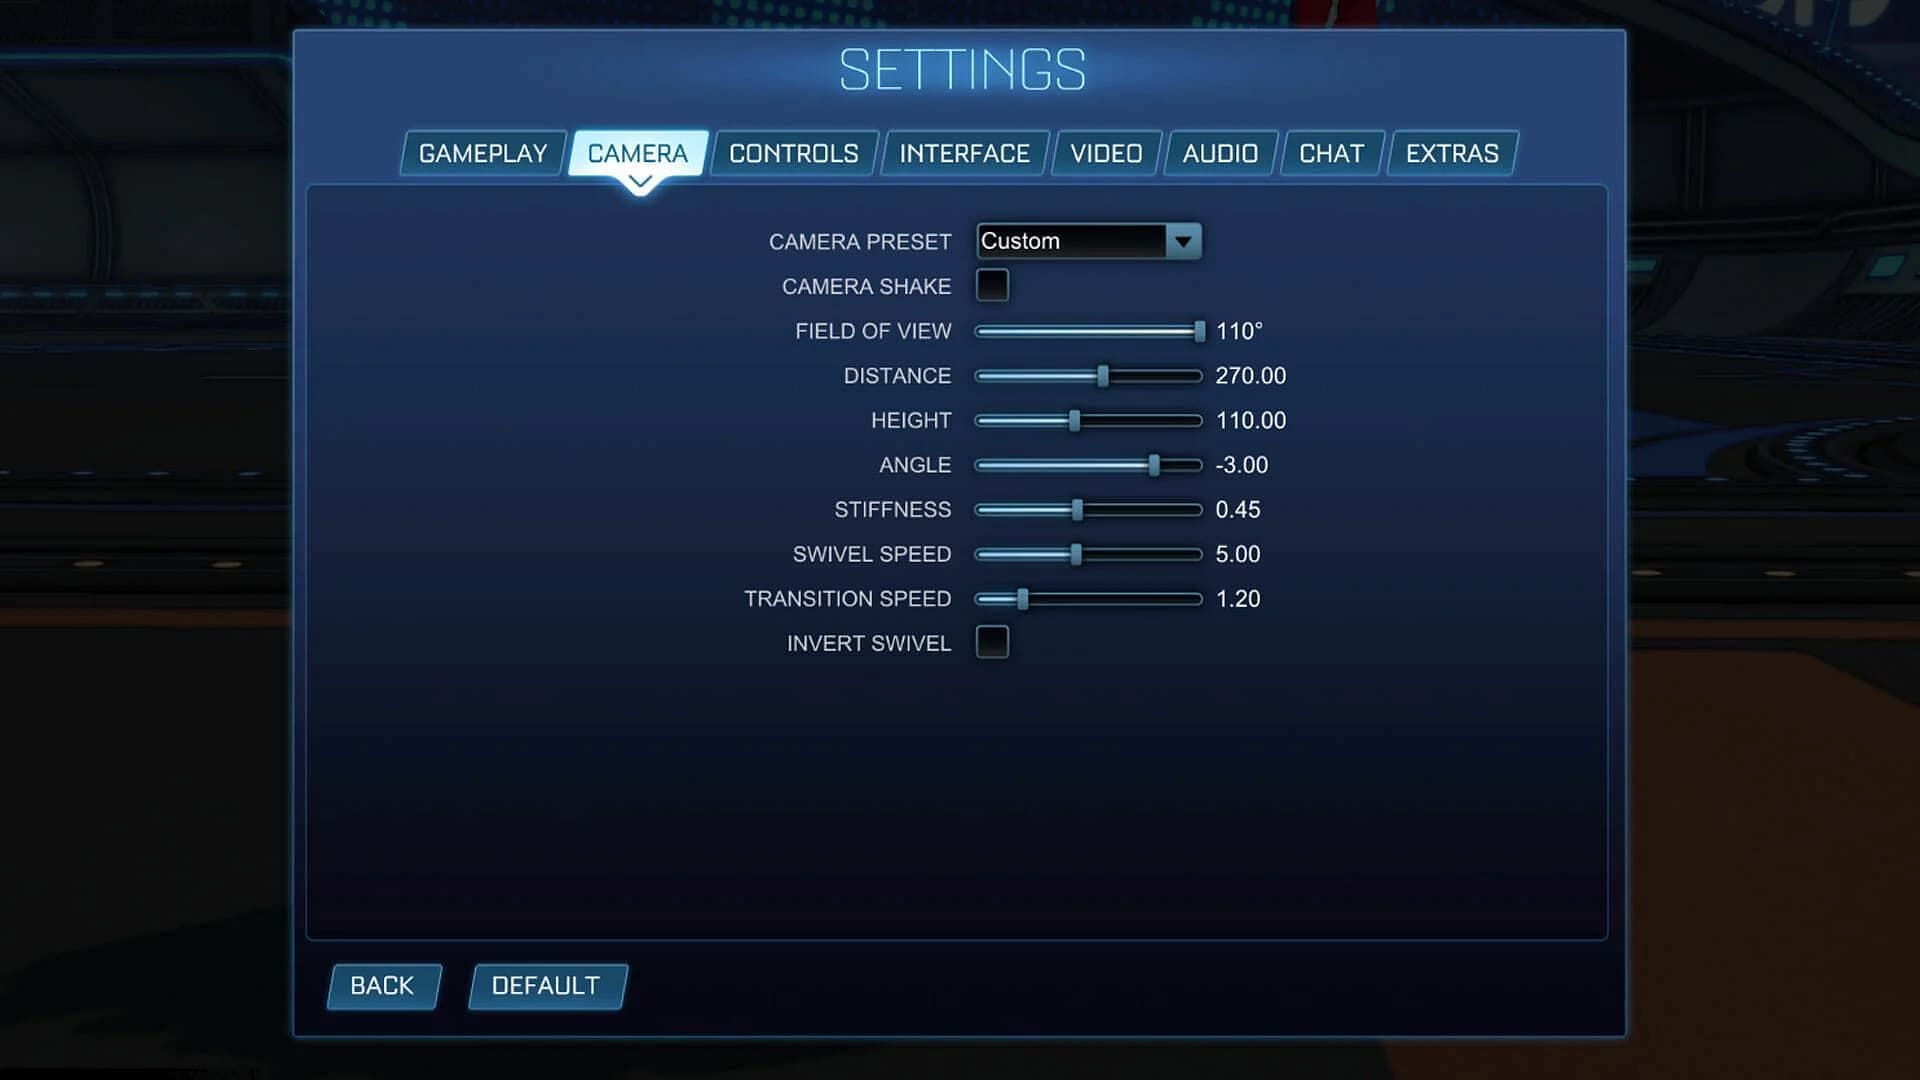 Use these settings to get the best camera view possible (Image via Psyonix)